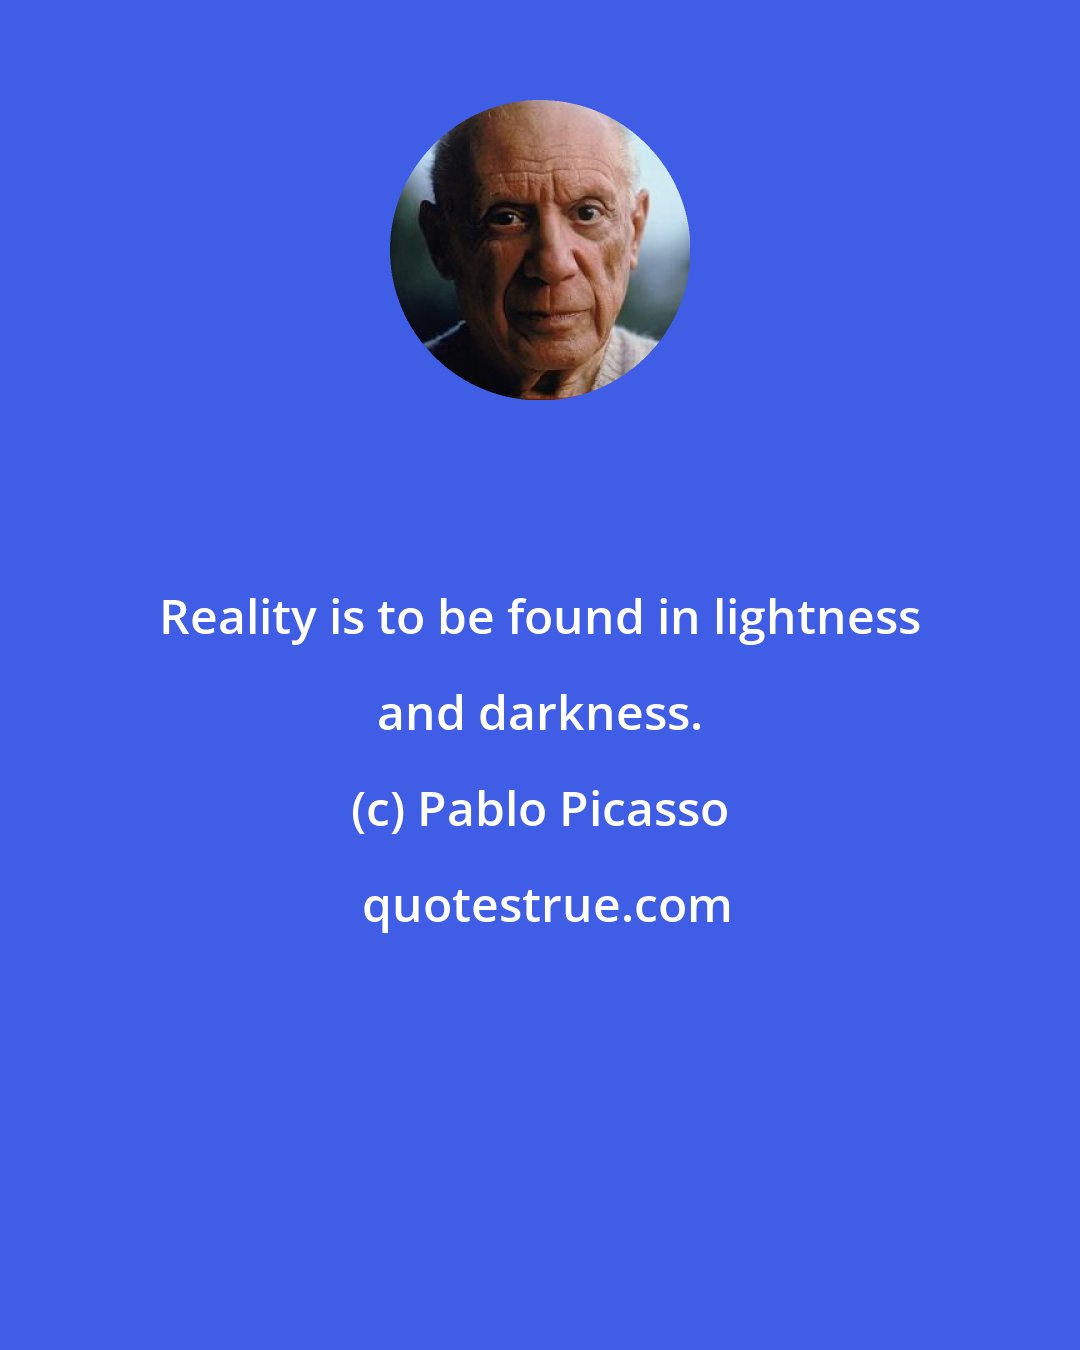 Pablo Picasso: Reality is to be found in lightness and darkness.